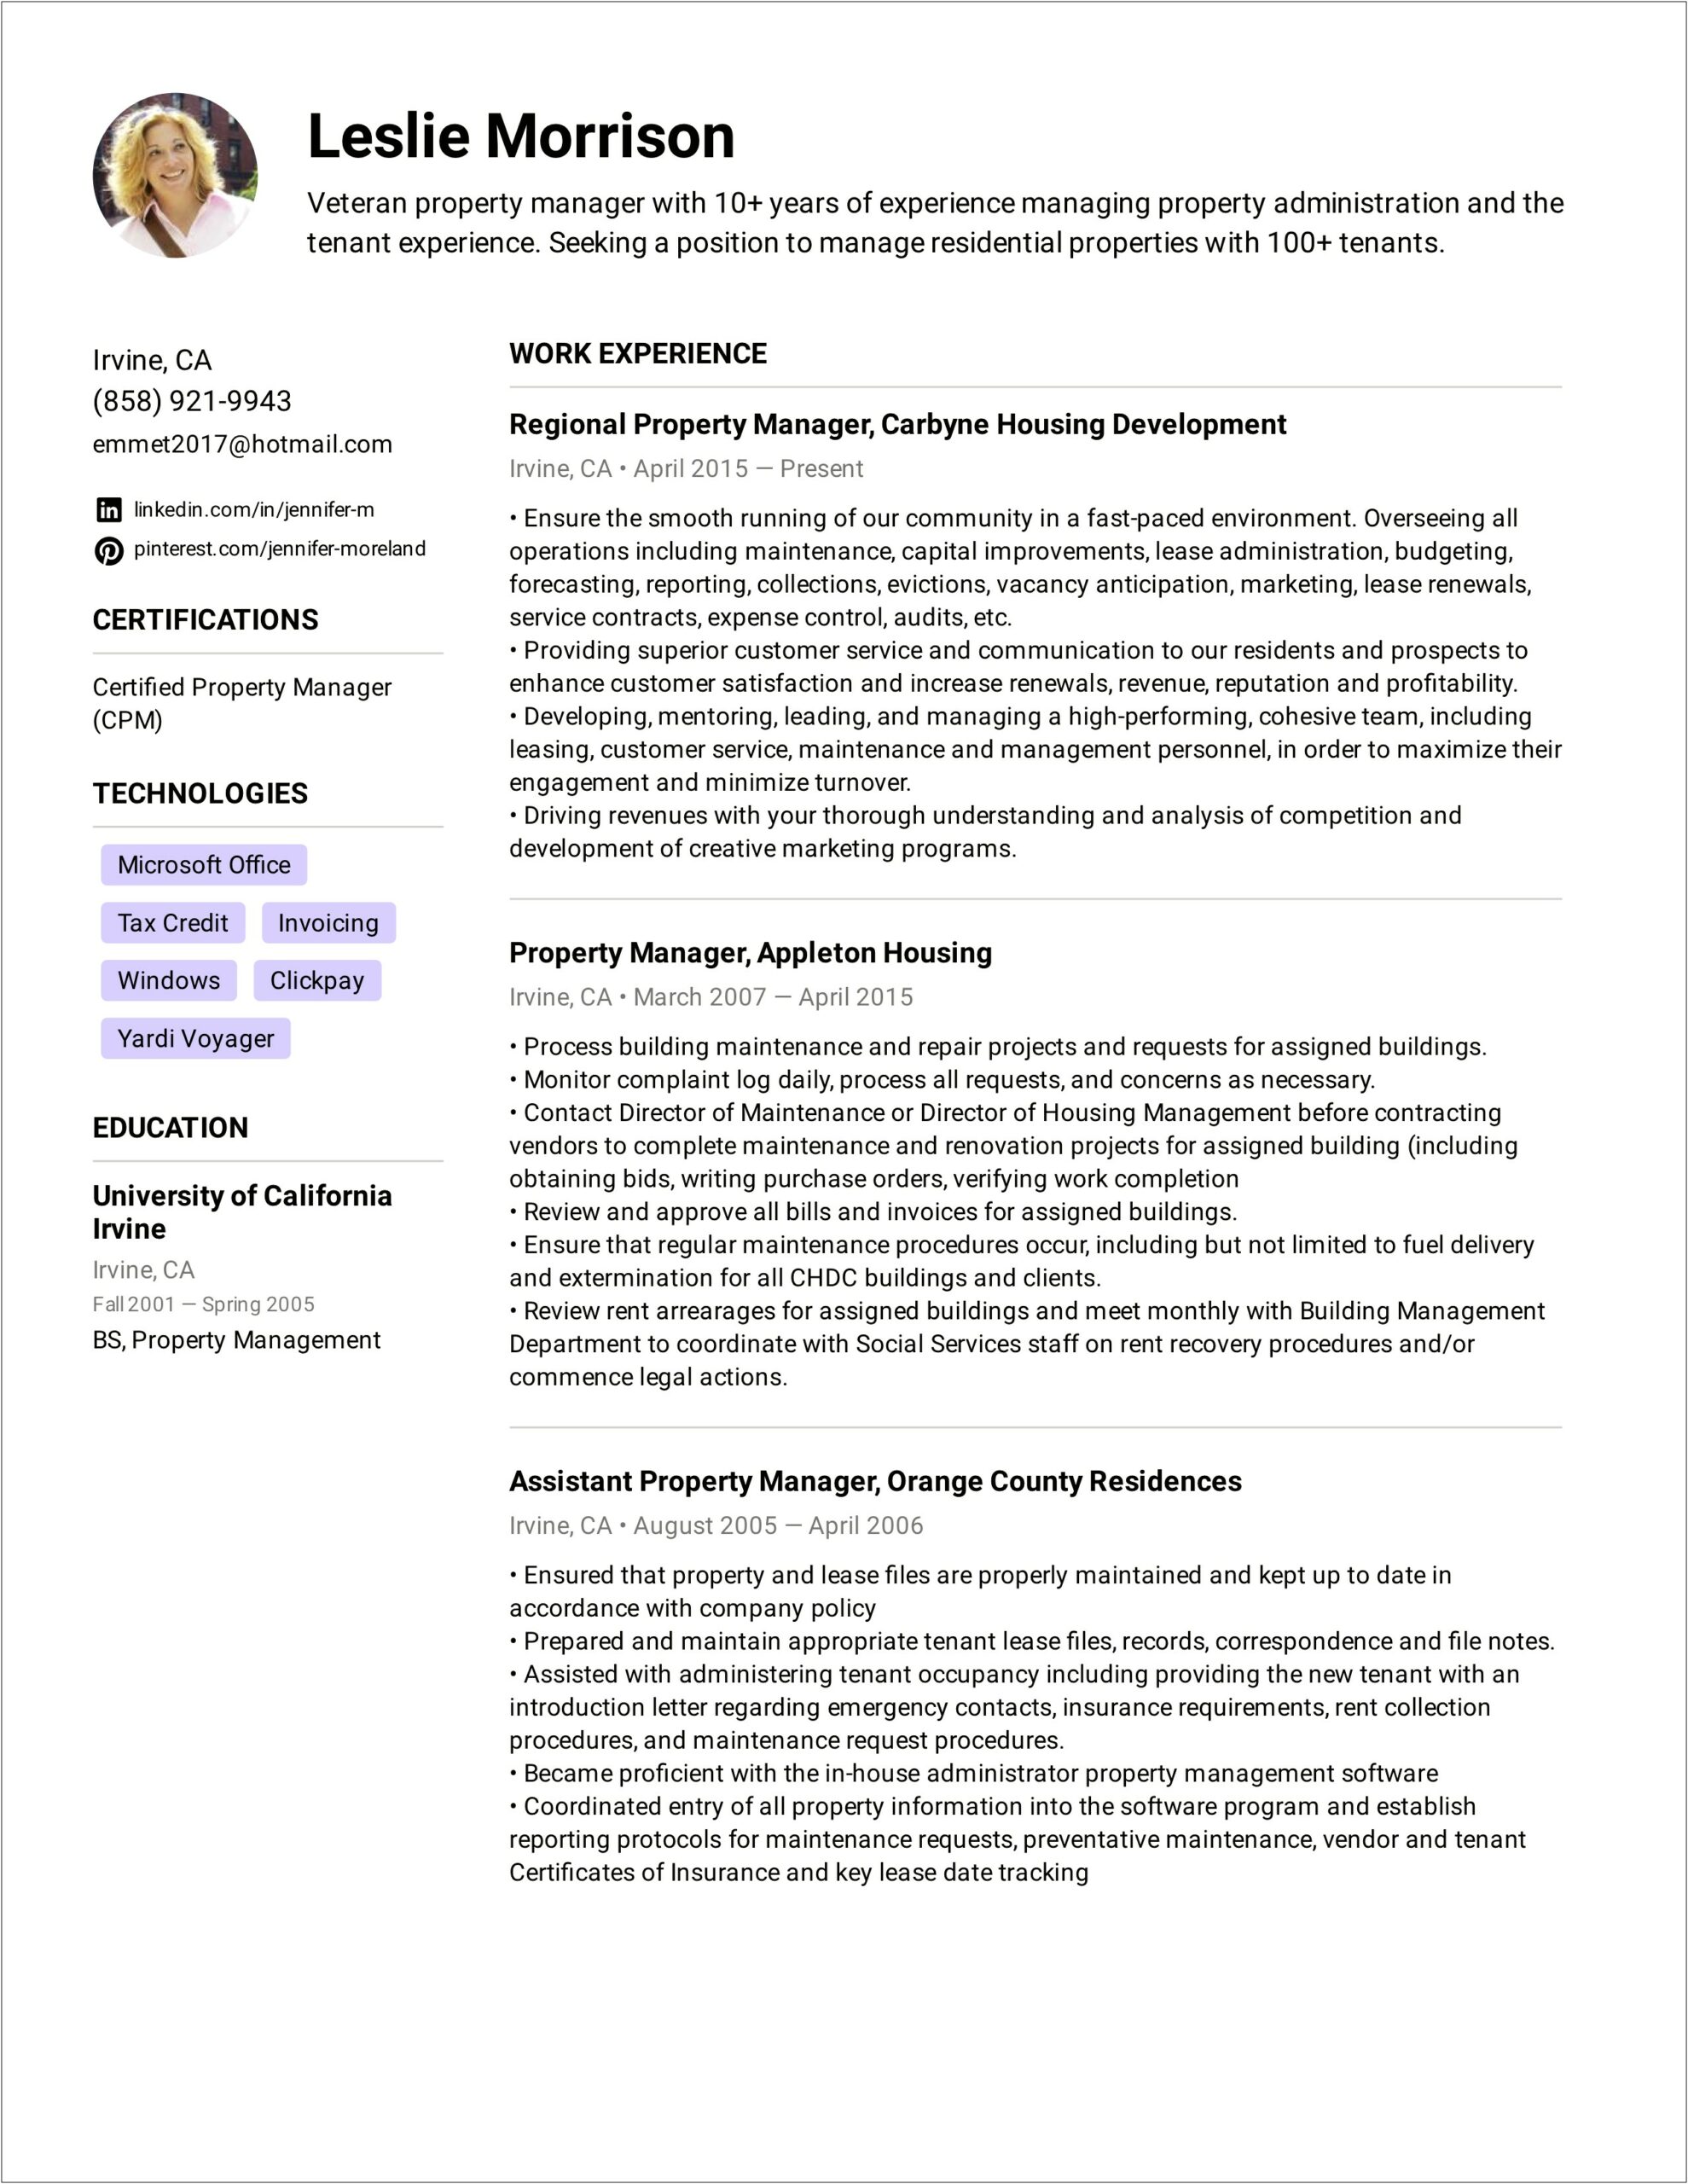 Quantify Resume Examples Office Manager